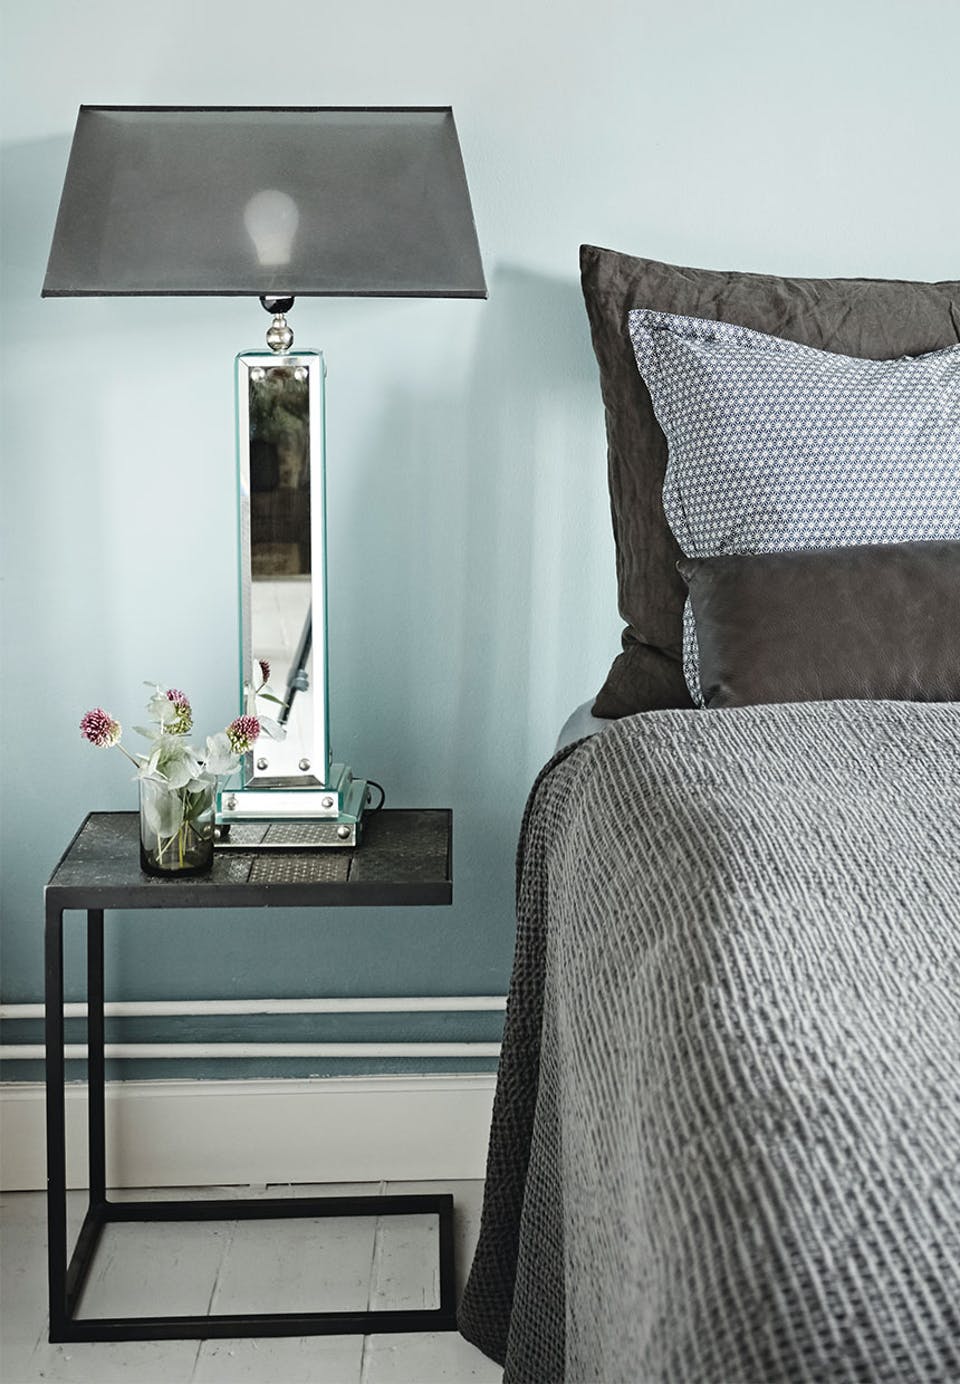 The bedroom is done in dove grey, with grey and black touches, mirror and metal are used to give it a modern and fresh feel